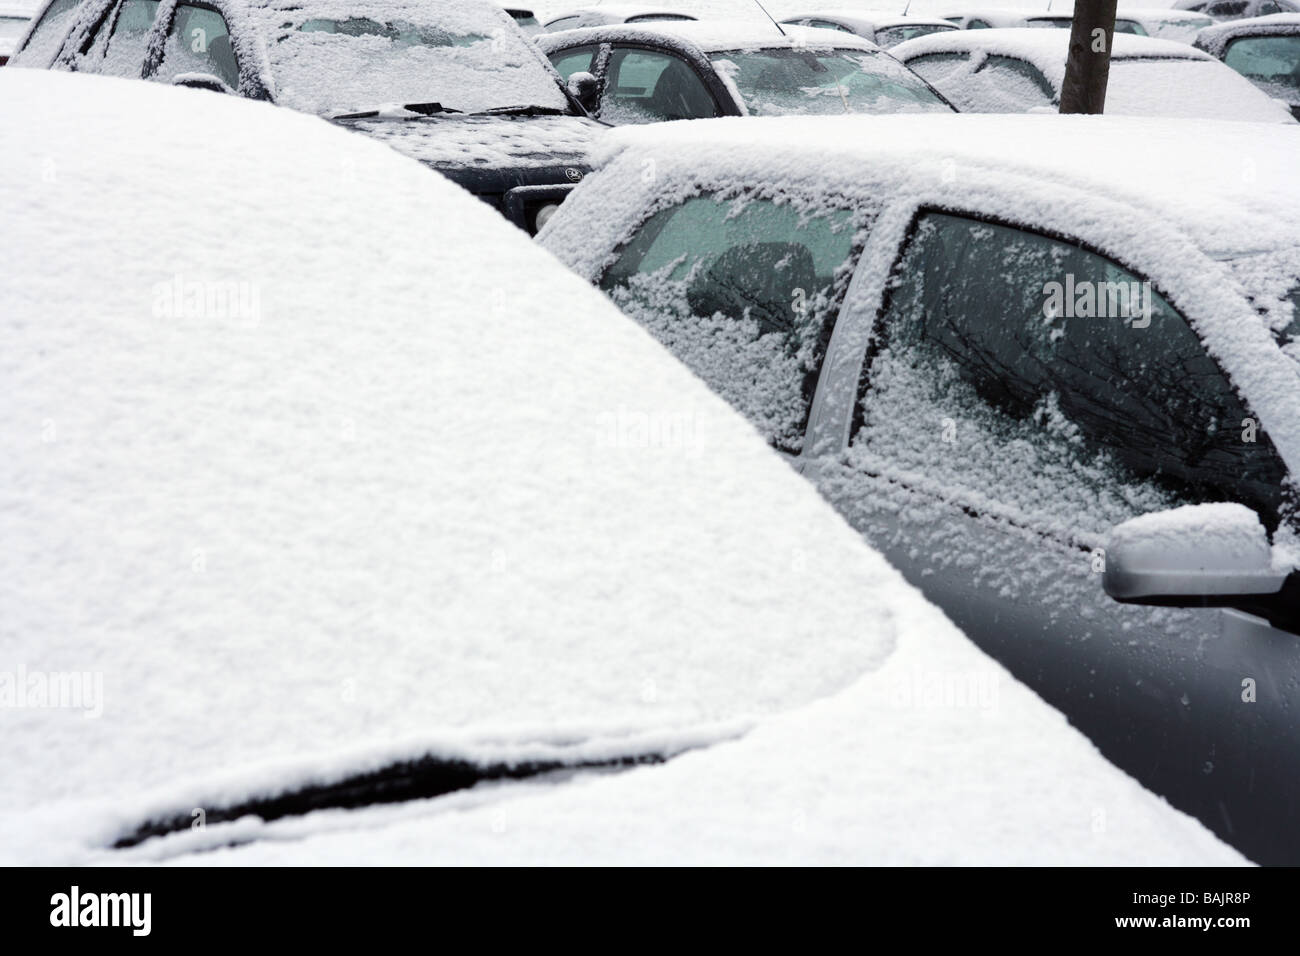 Parked cars covered in snow Stock Photo